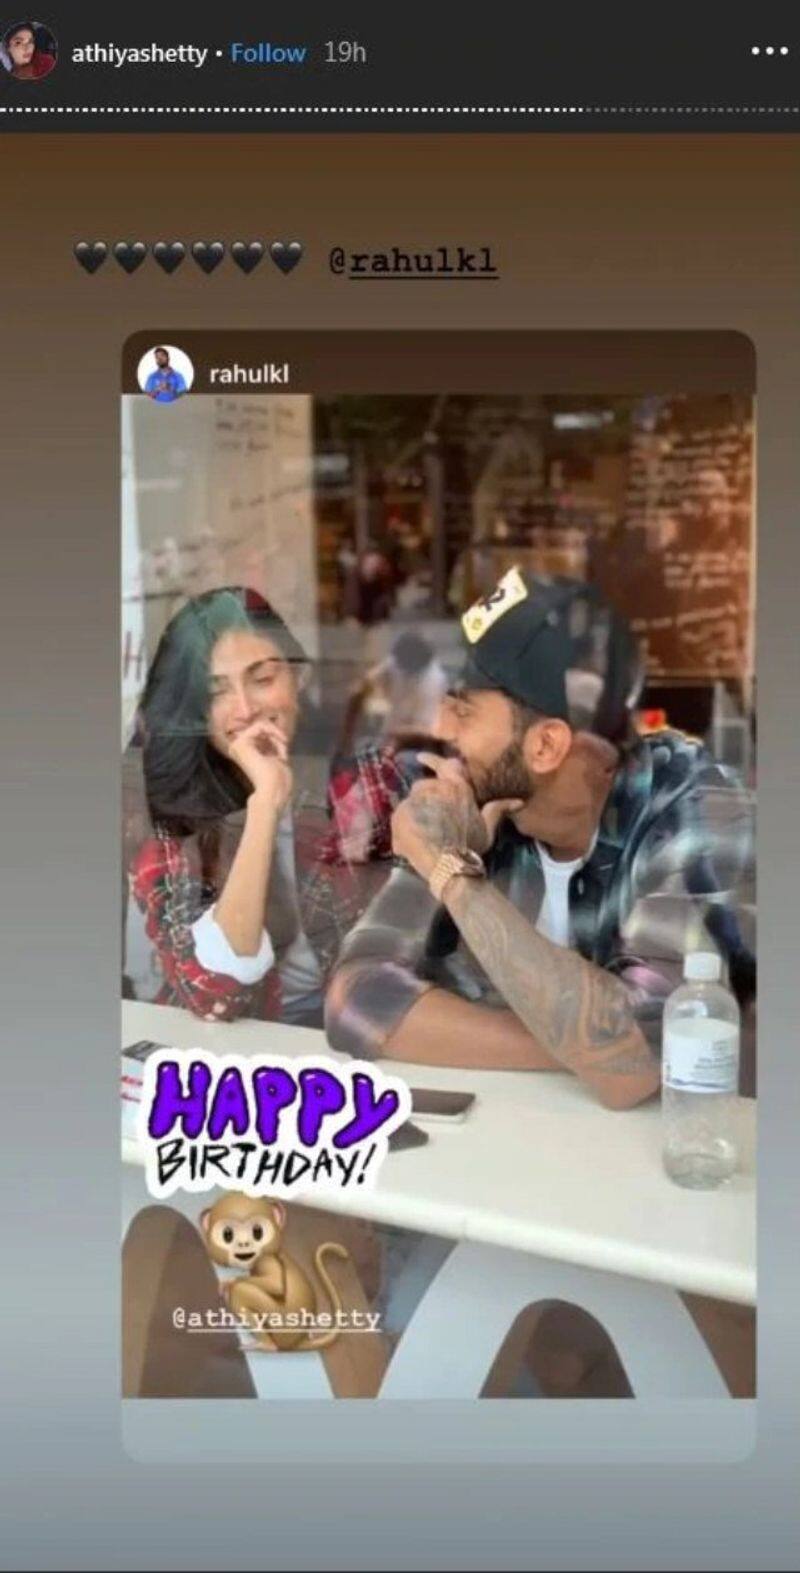 KL rahul wish Bollywood actress athiya shetty on his birthday with beautiful picture